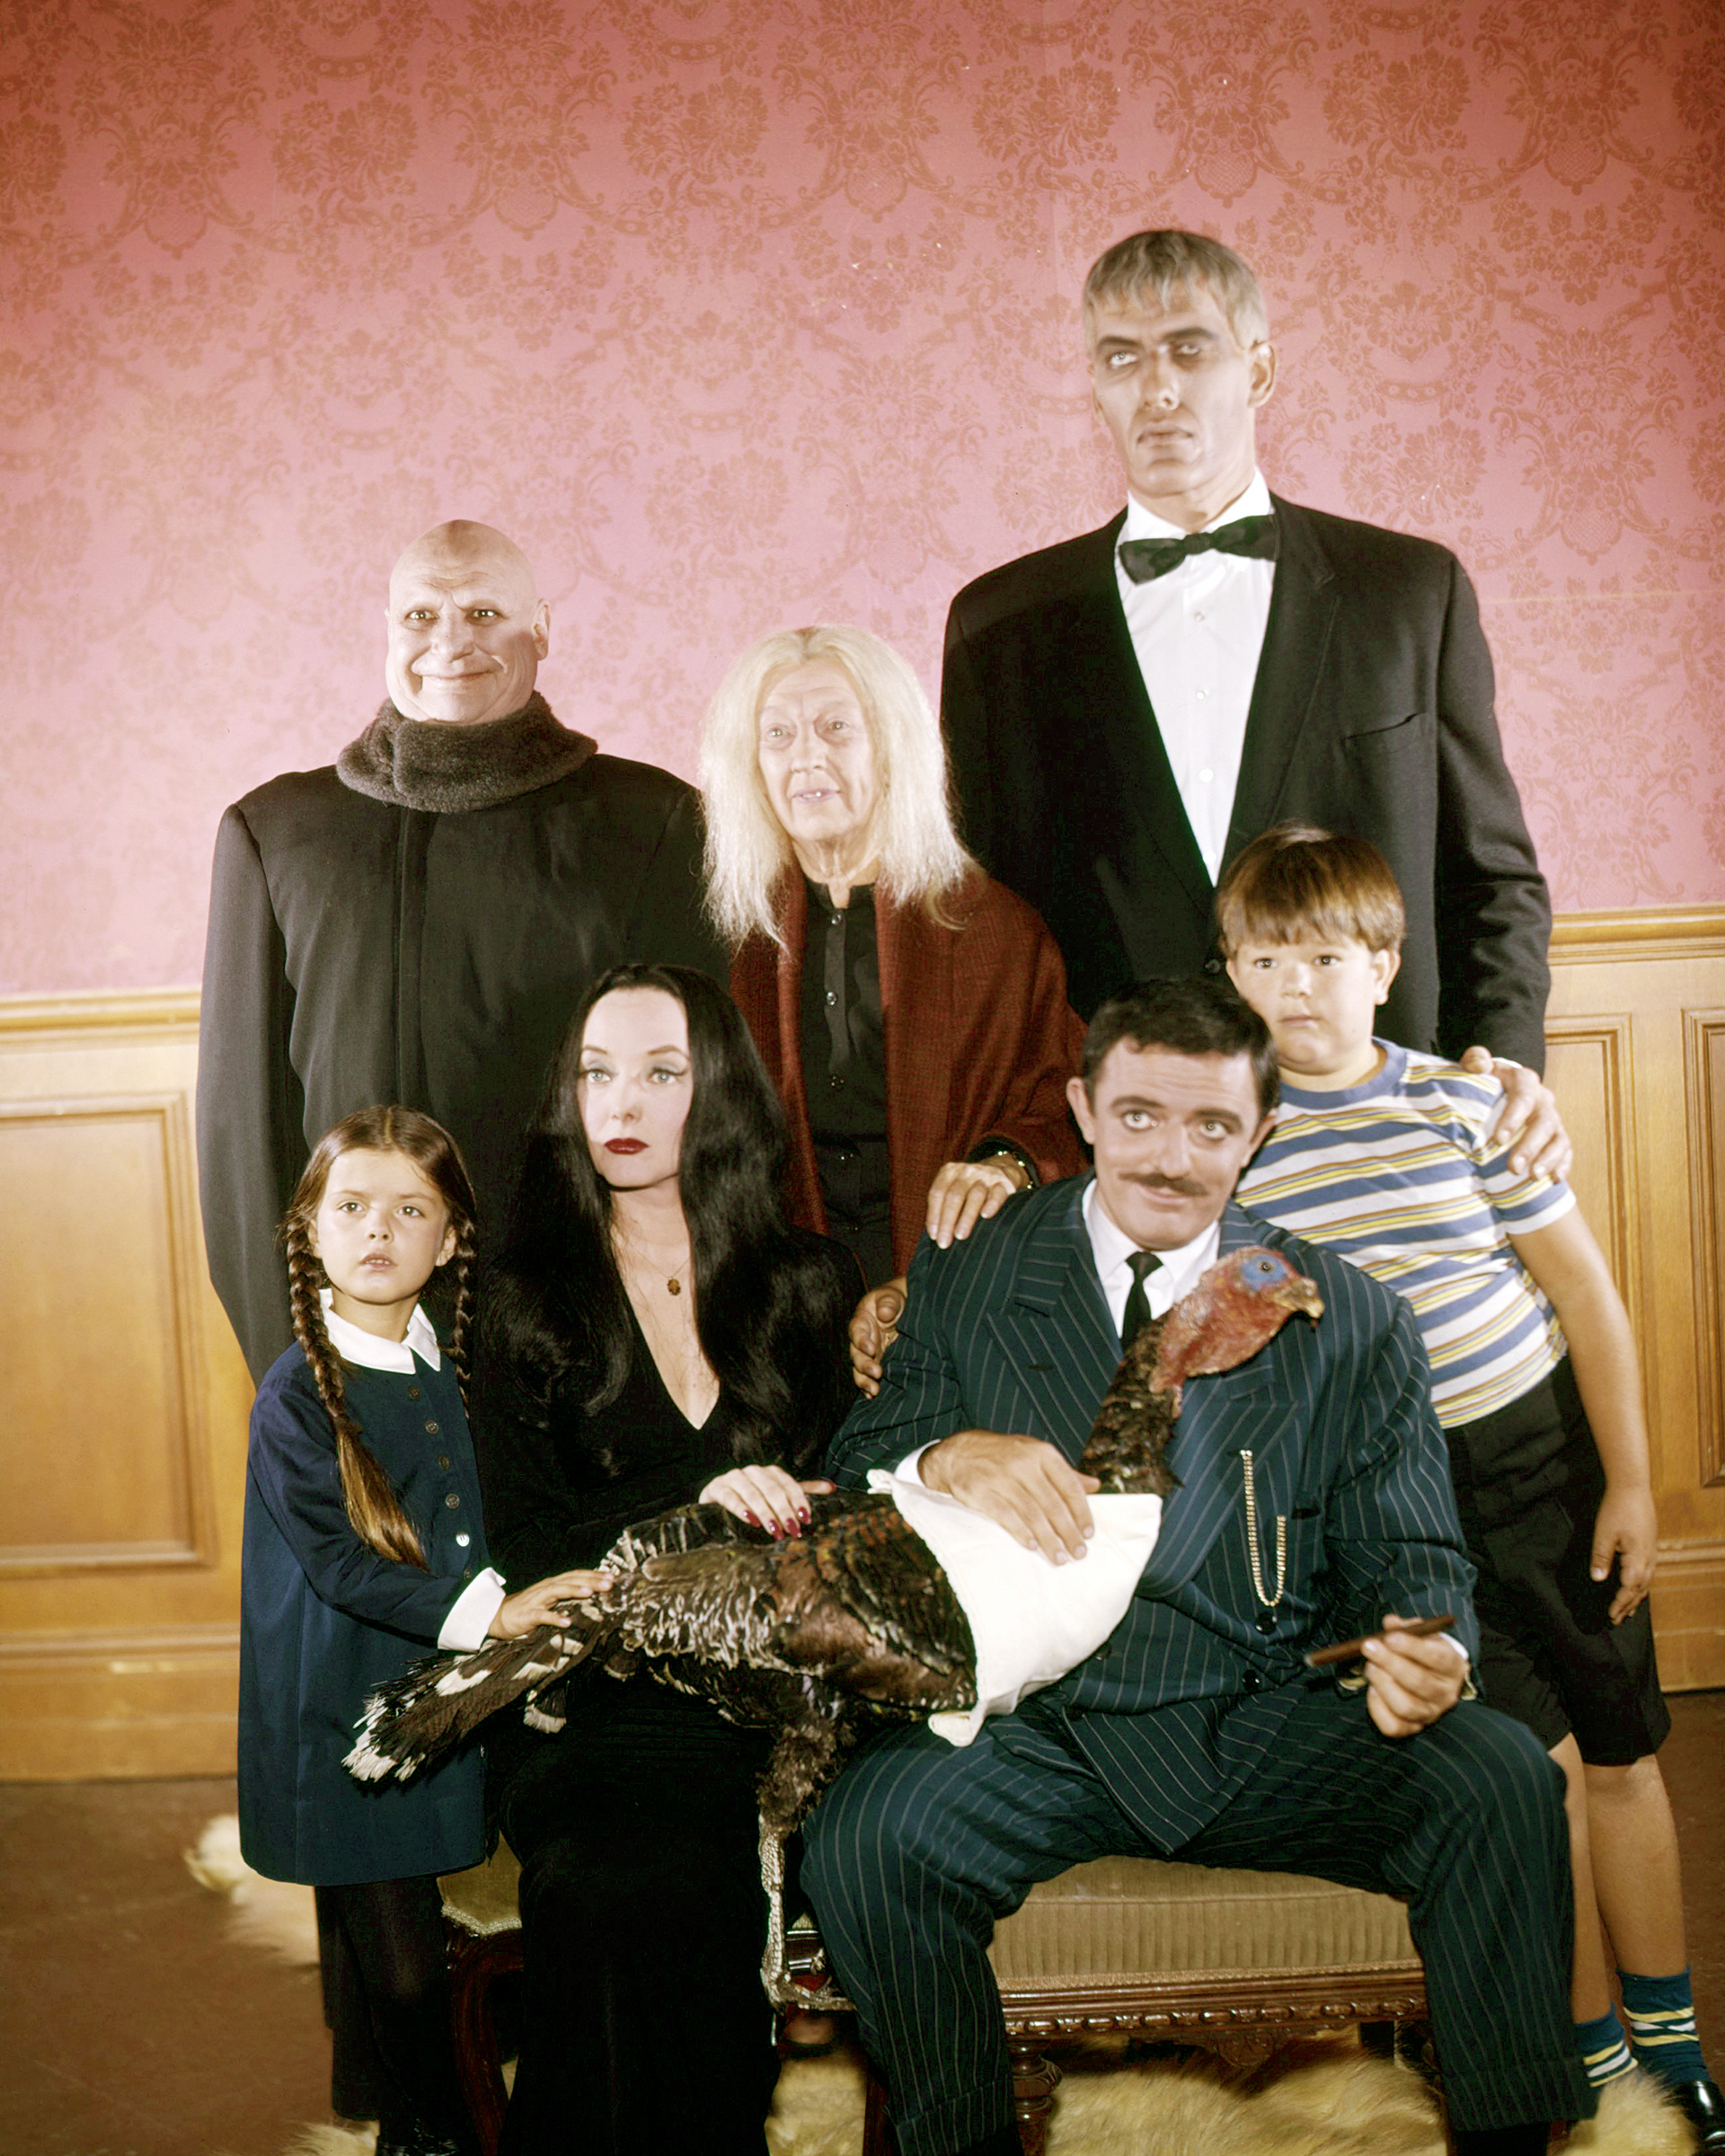 Los Locos Addams had only 64 chapters divided into two seasons.  Later over the years there were several reincarnations in different formats.